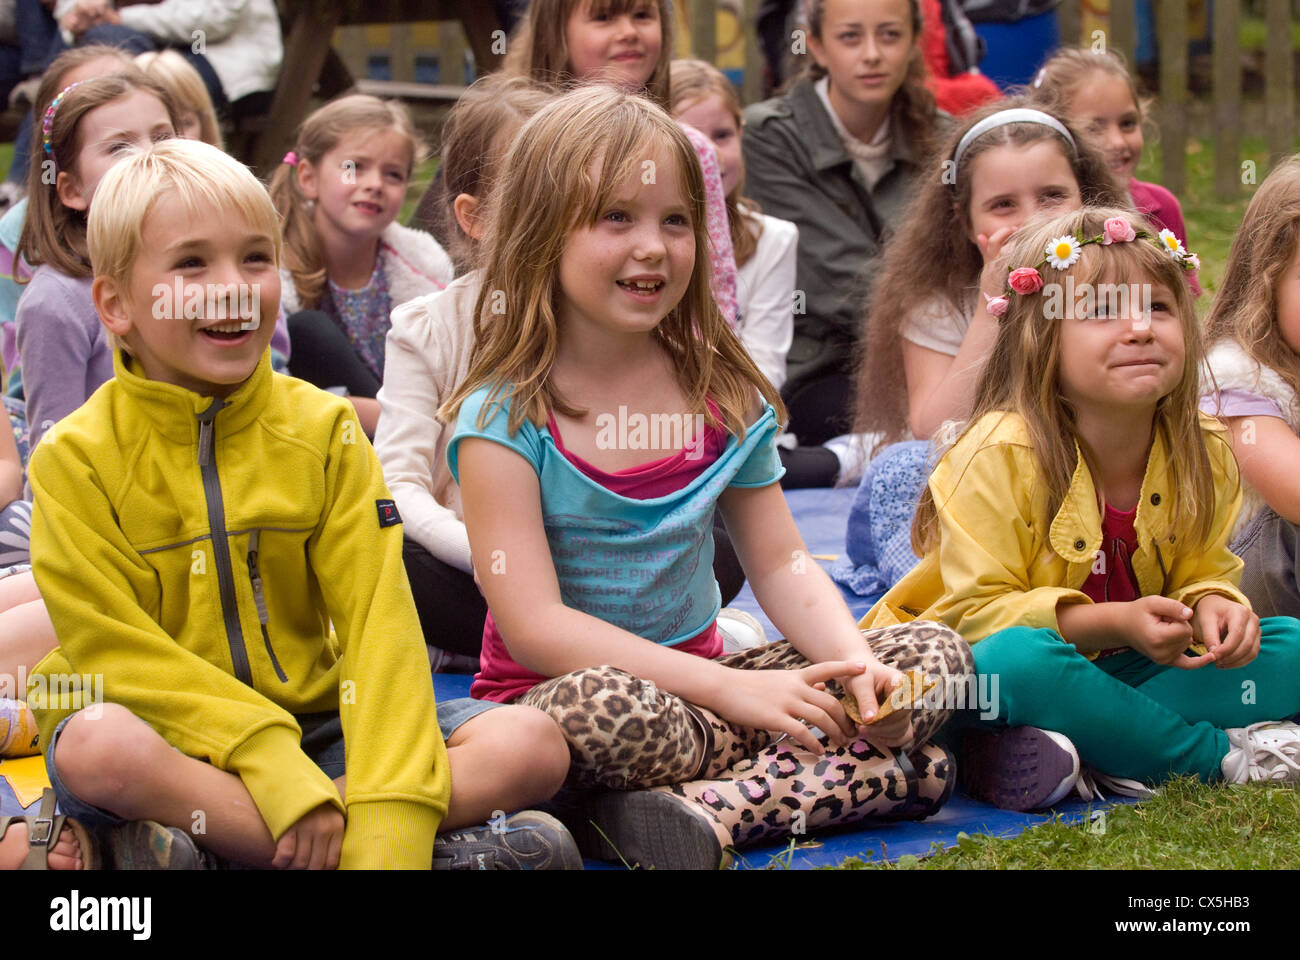 Youngsters being entertained by a clown at a children's outdoor fun day, Liphook, Hampshire, UK. Stock Photo